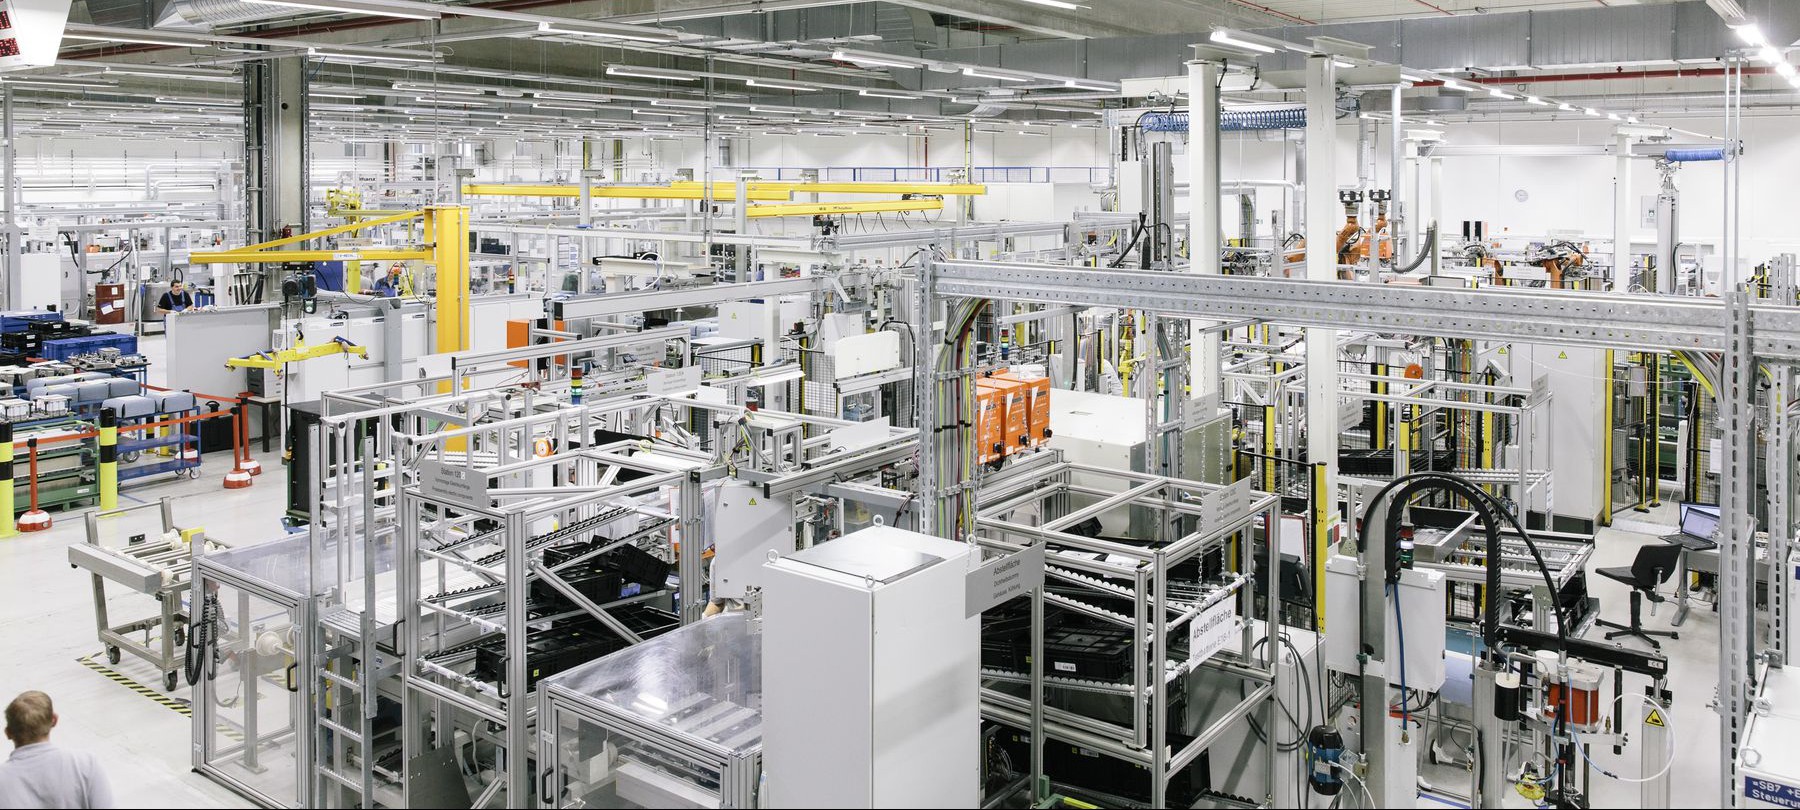 Daimler announces a €500 million investment in a new battery factory in